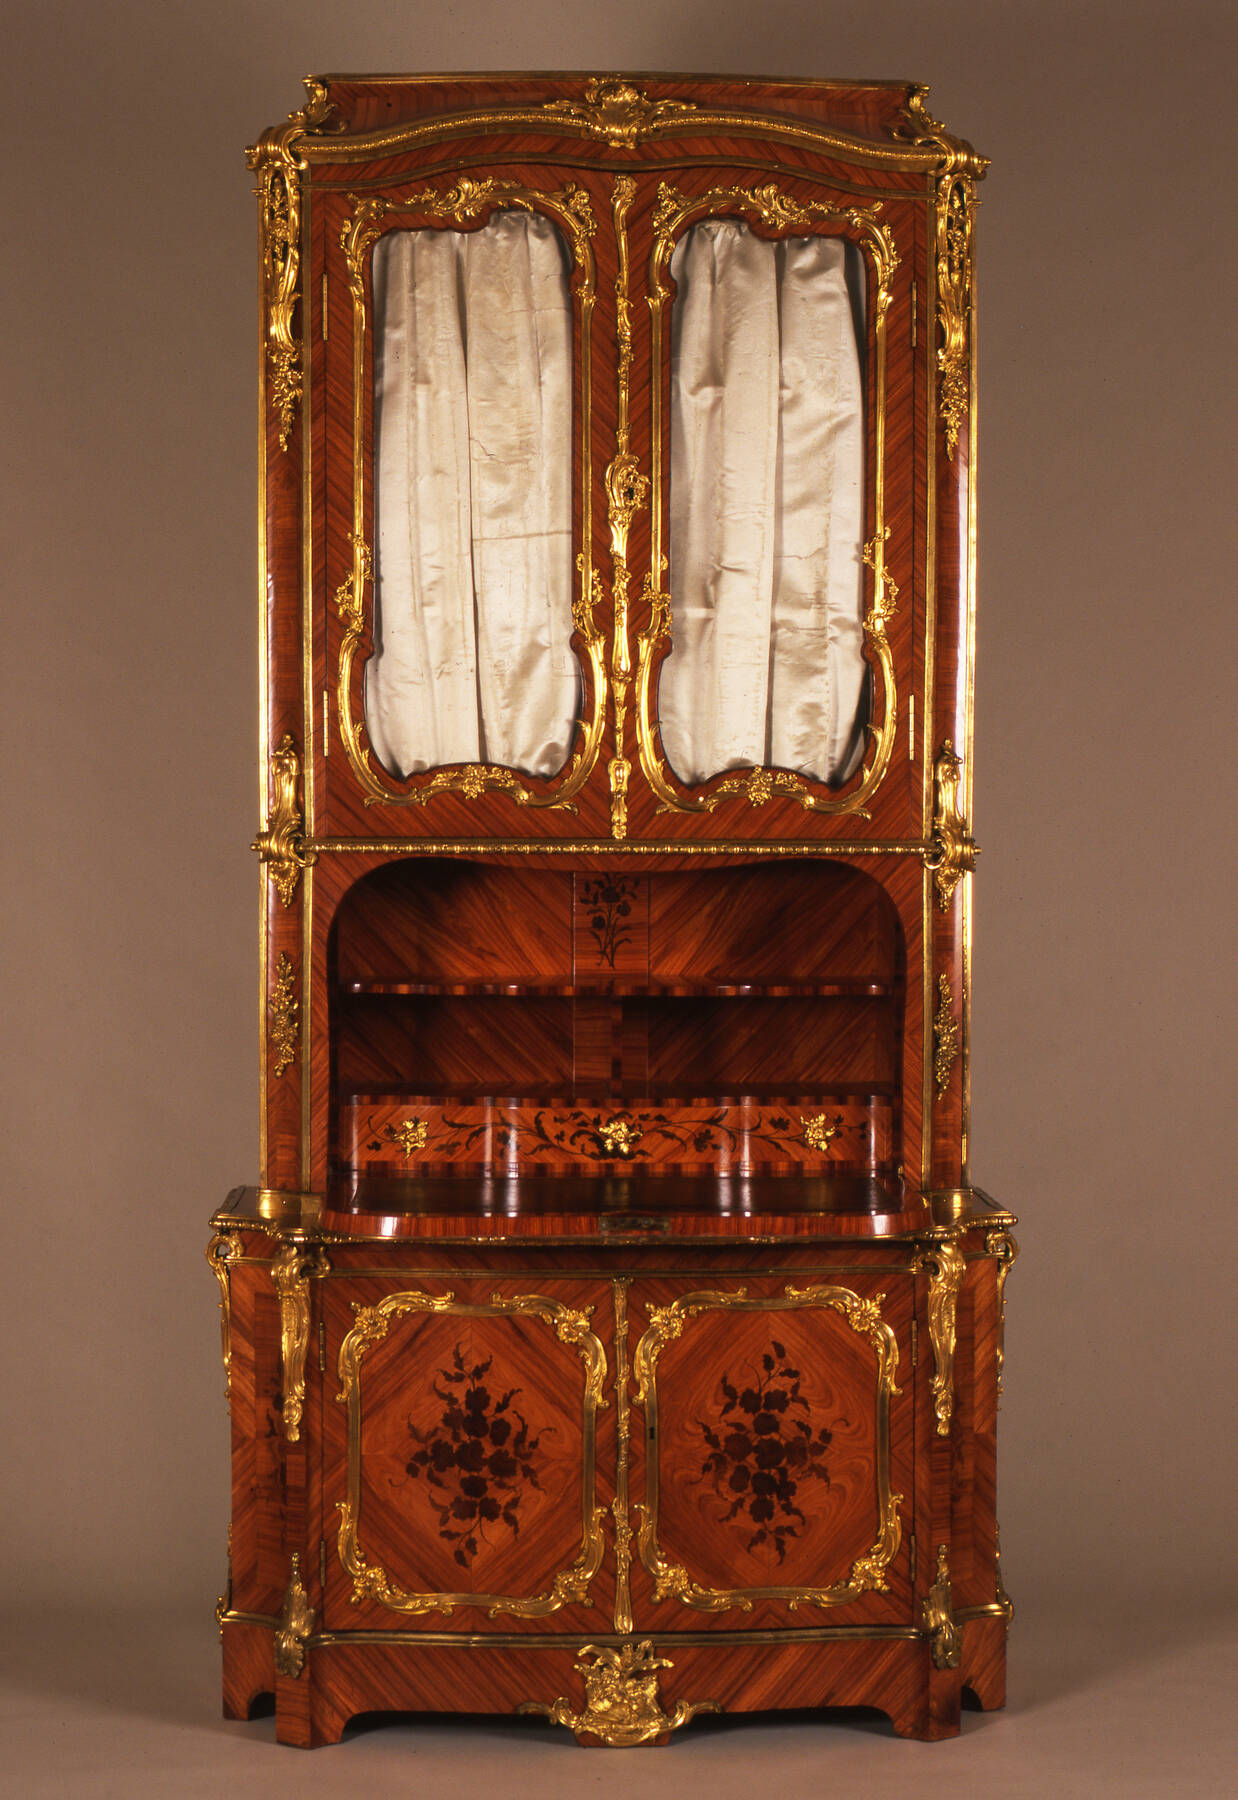 a tall secretary desk with two sets of doors, one under the desktop of shelves and drawers, and the other above, constructed with three different types of wood and decorated with gilt bronze mounts, white marble accents, and two white satin curtains installed inside the upper set of cabinet doors